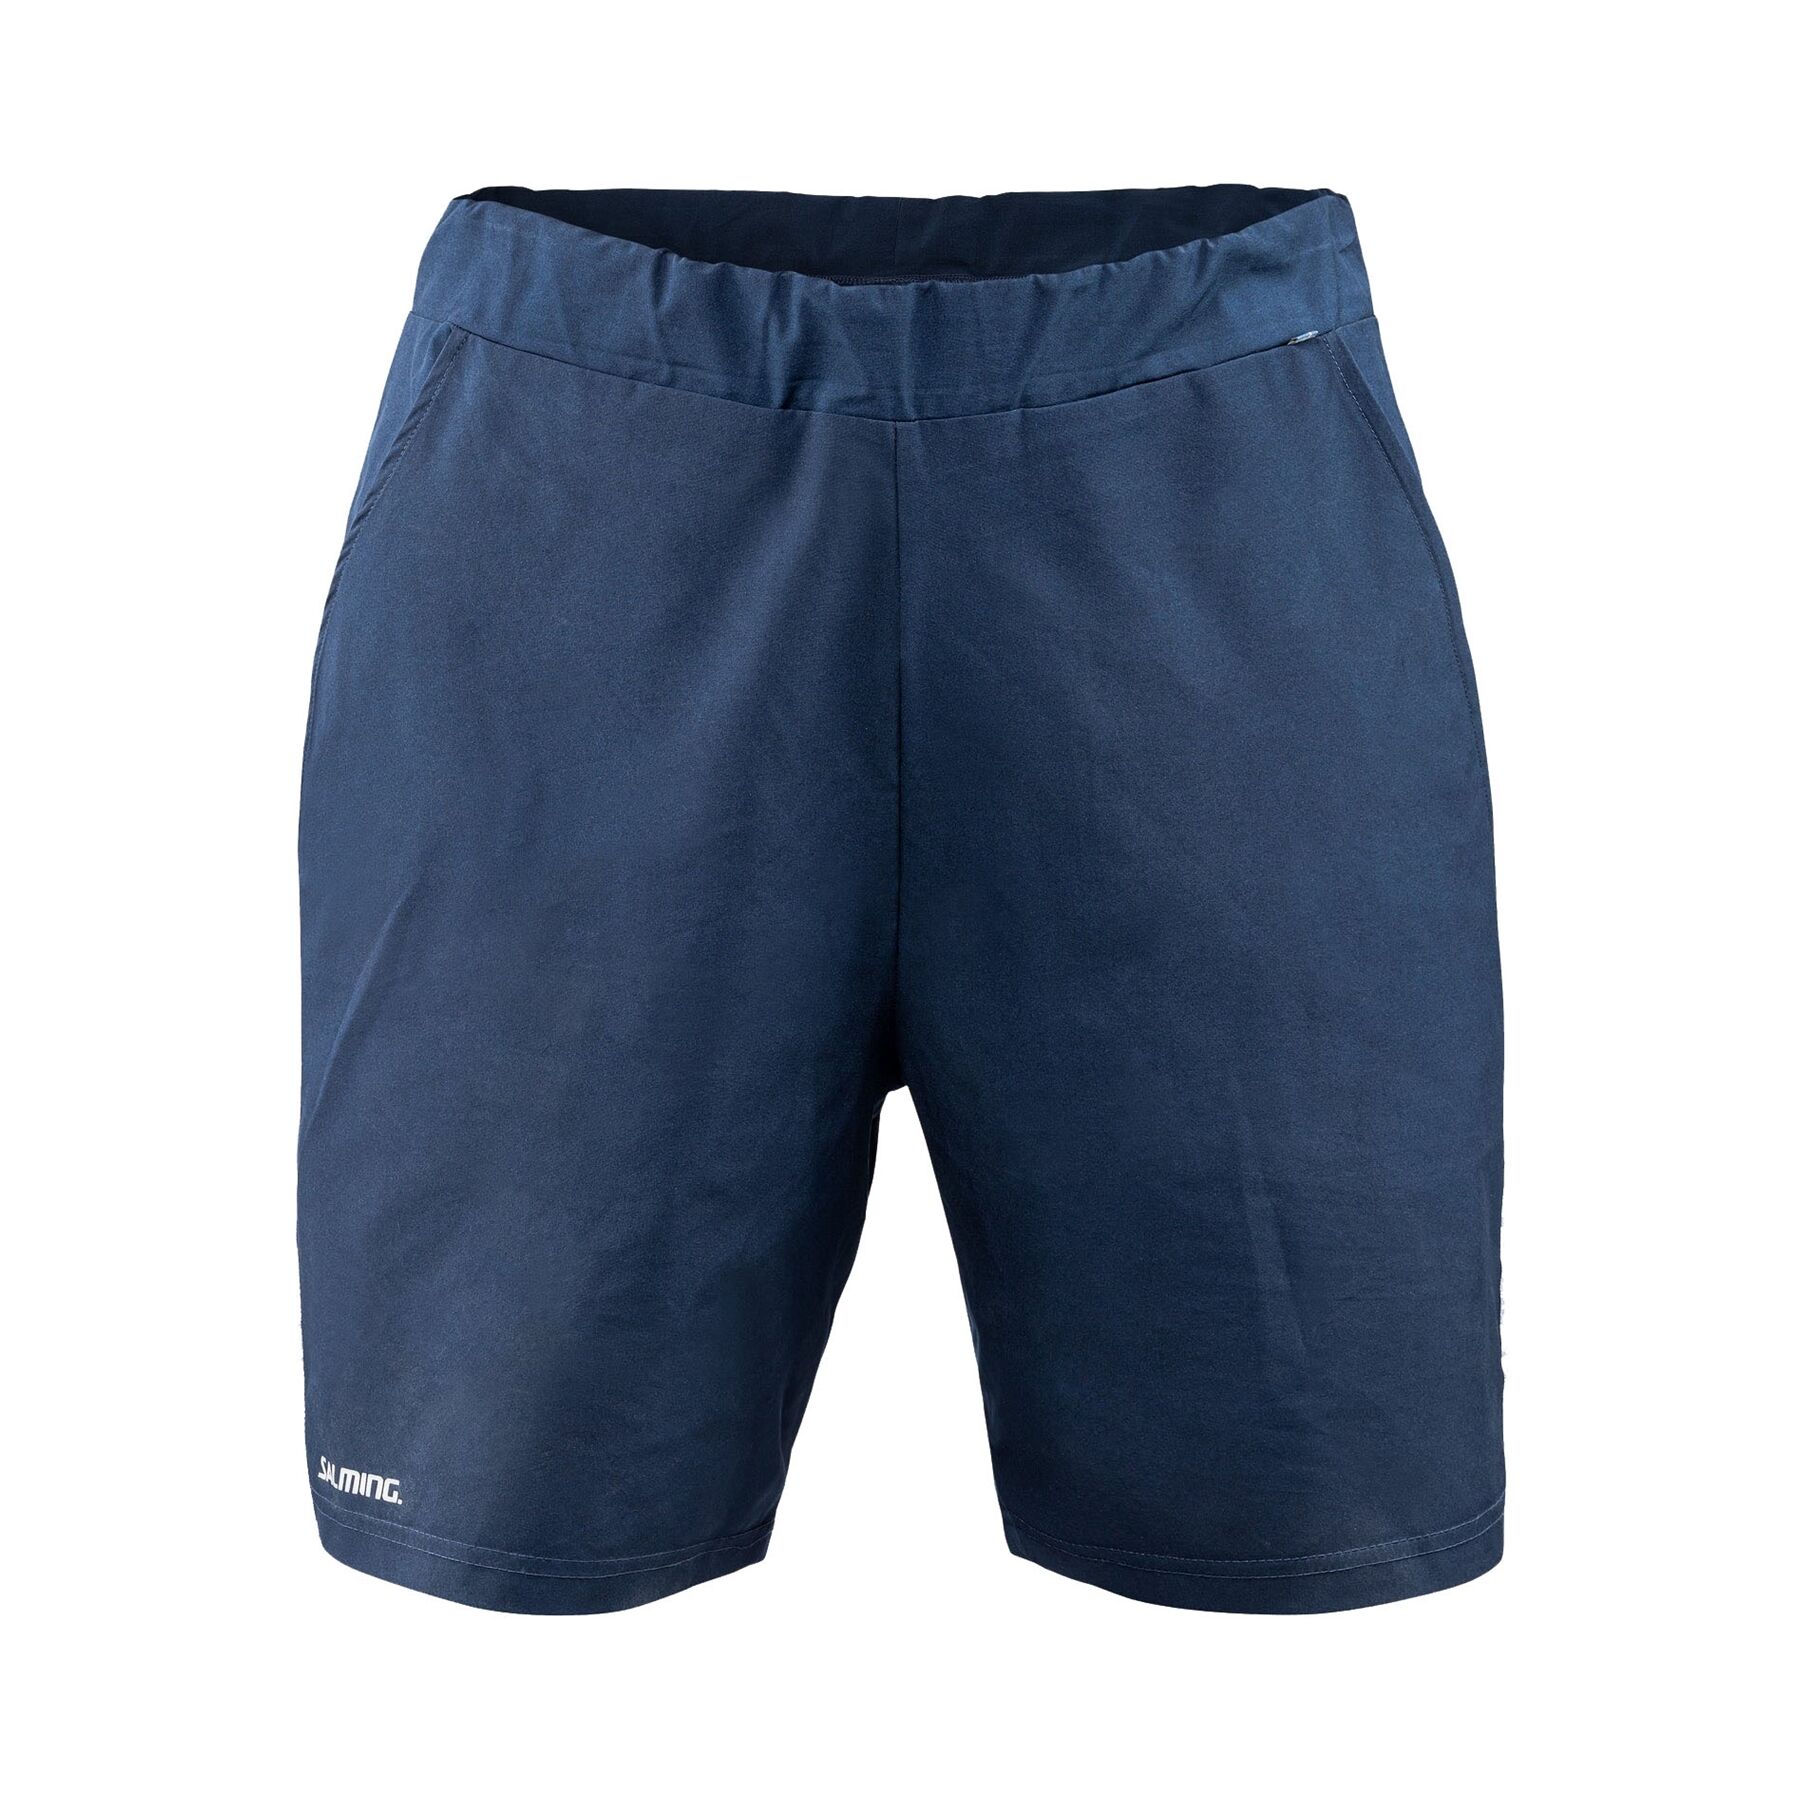 Salming Classic Shorts Navy S